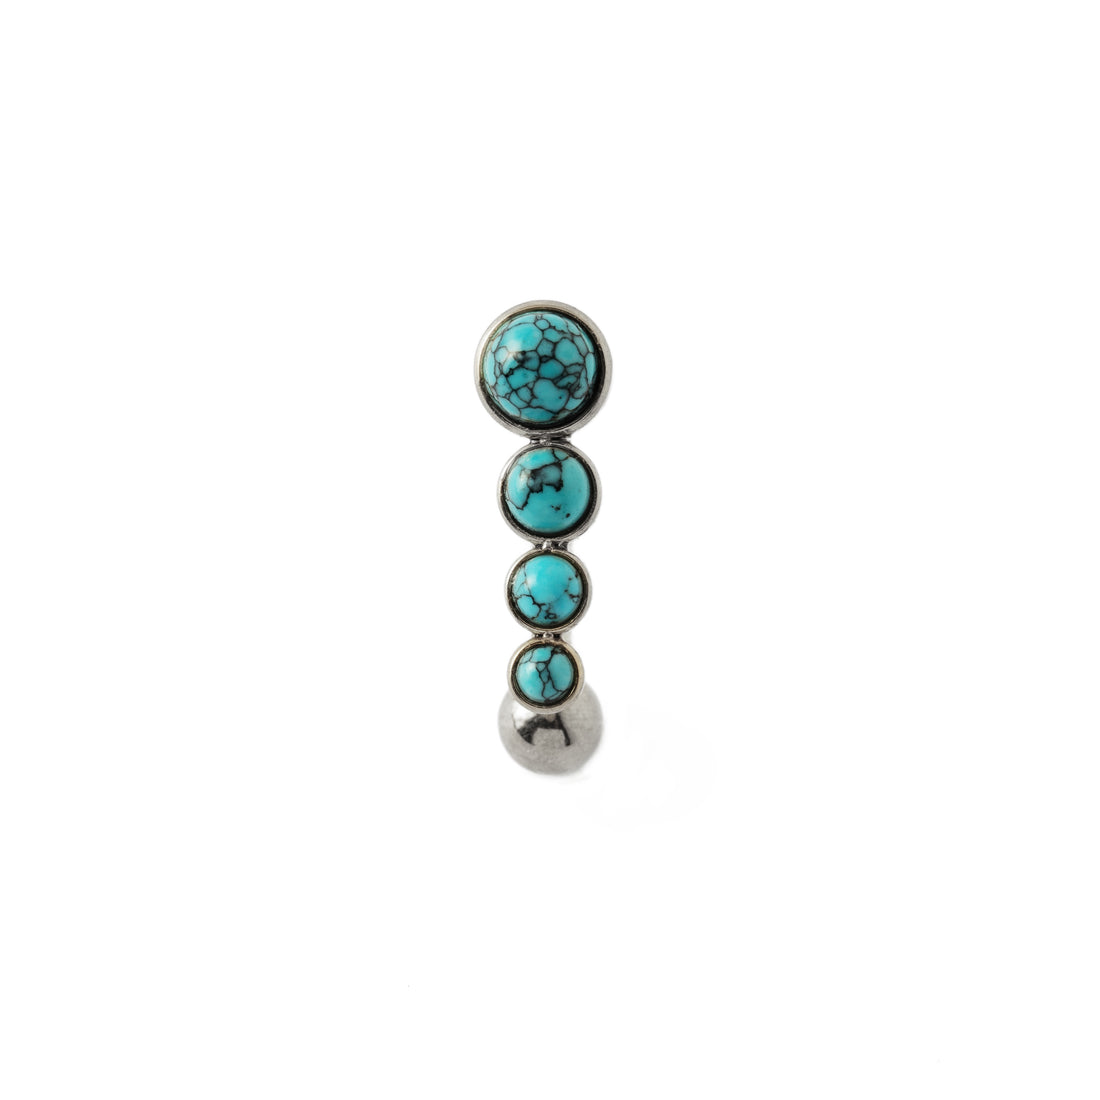 Newton Navel Piercing with Turquoise